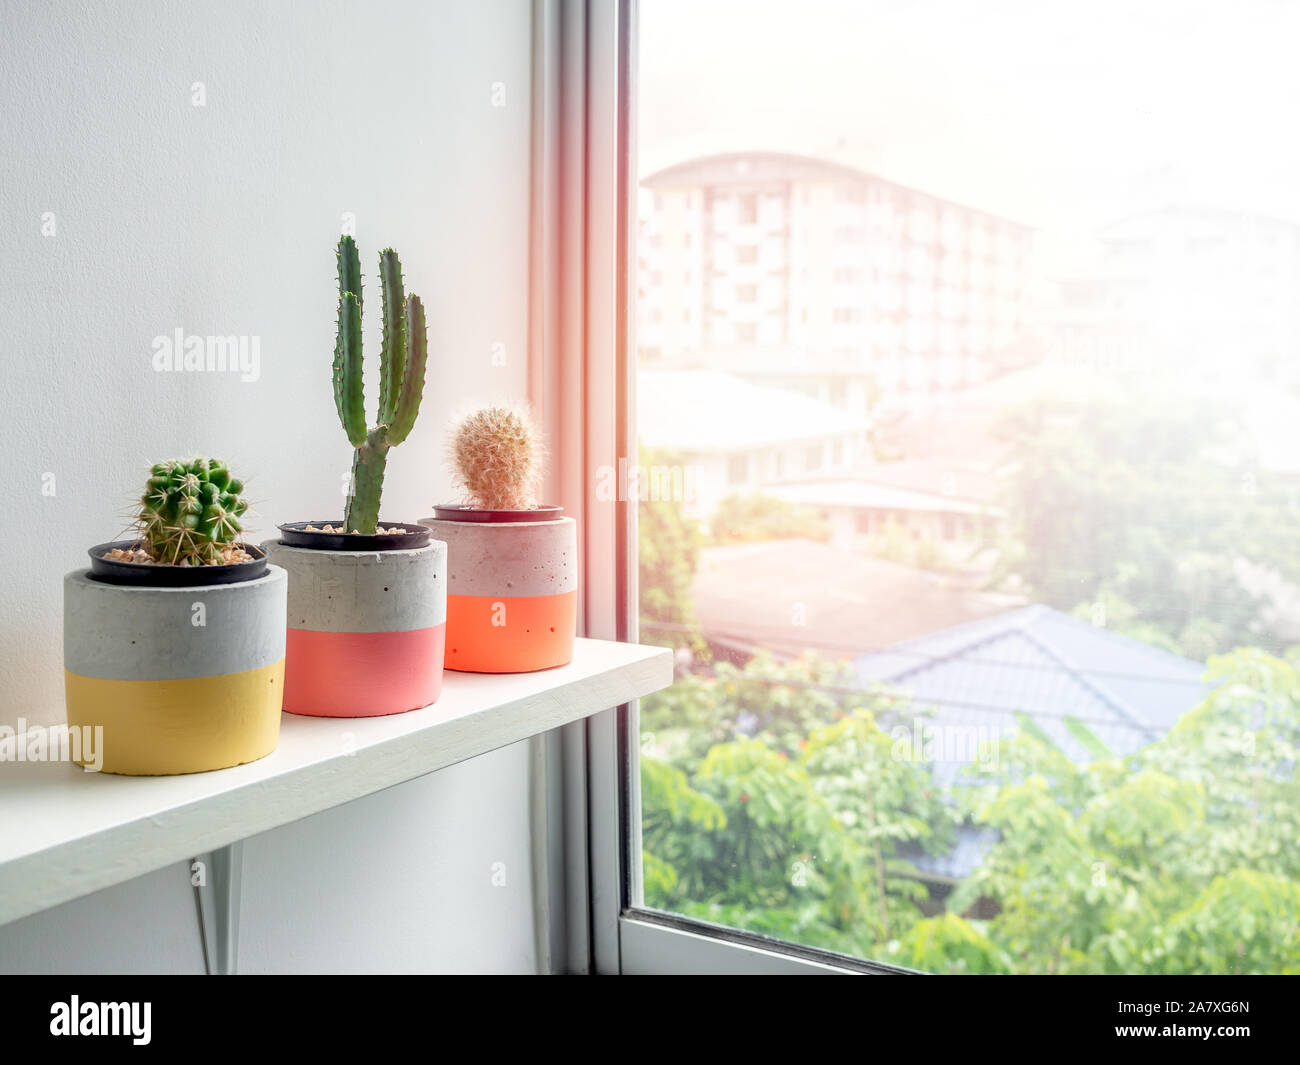 Cactus plants in colorful modern geometric concrete planters on white shelf near window glass with copy space. Beautiful painted concrete pots. Stock Photo